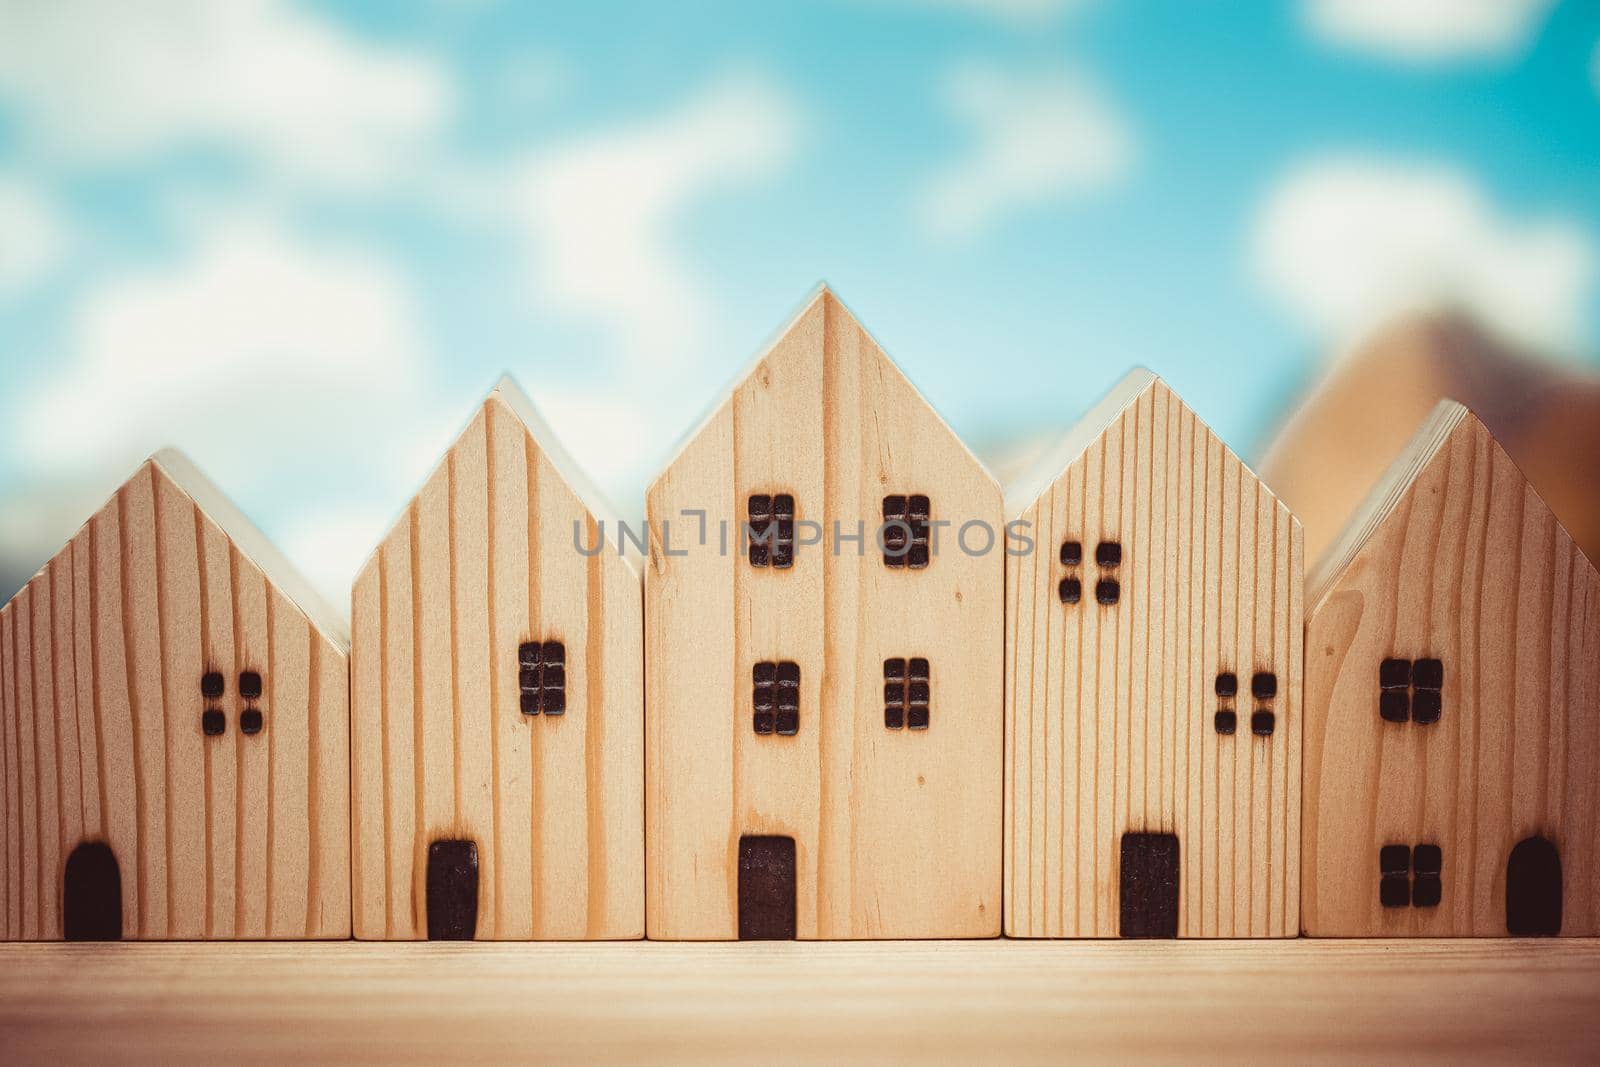 wooden home model toy many house row community art decoration for background vintage colortone.